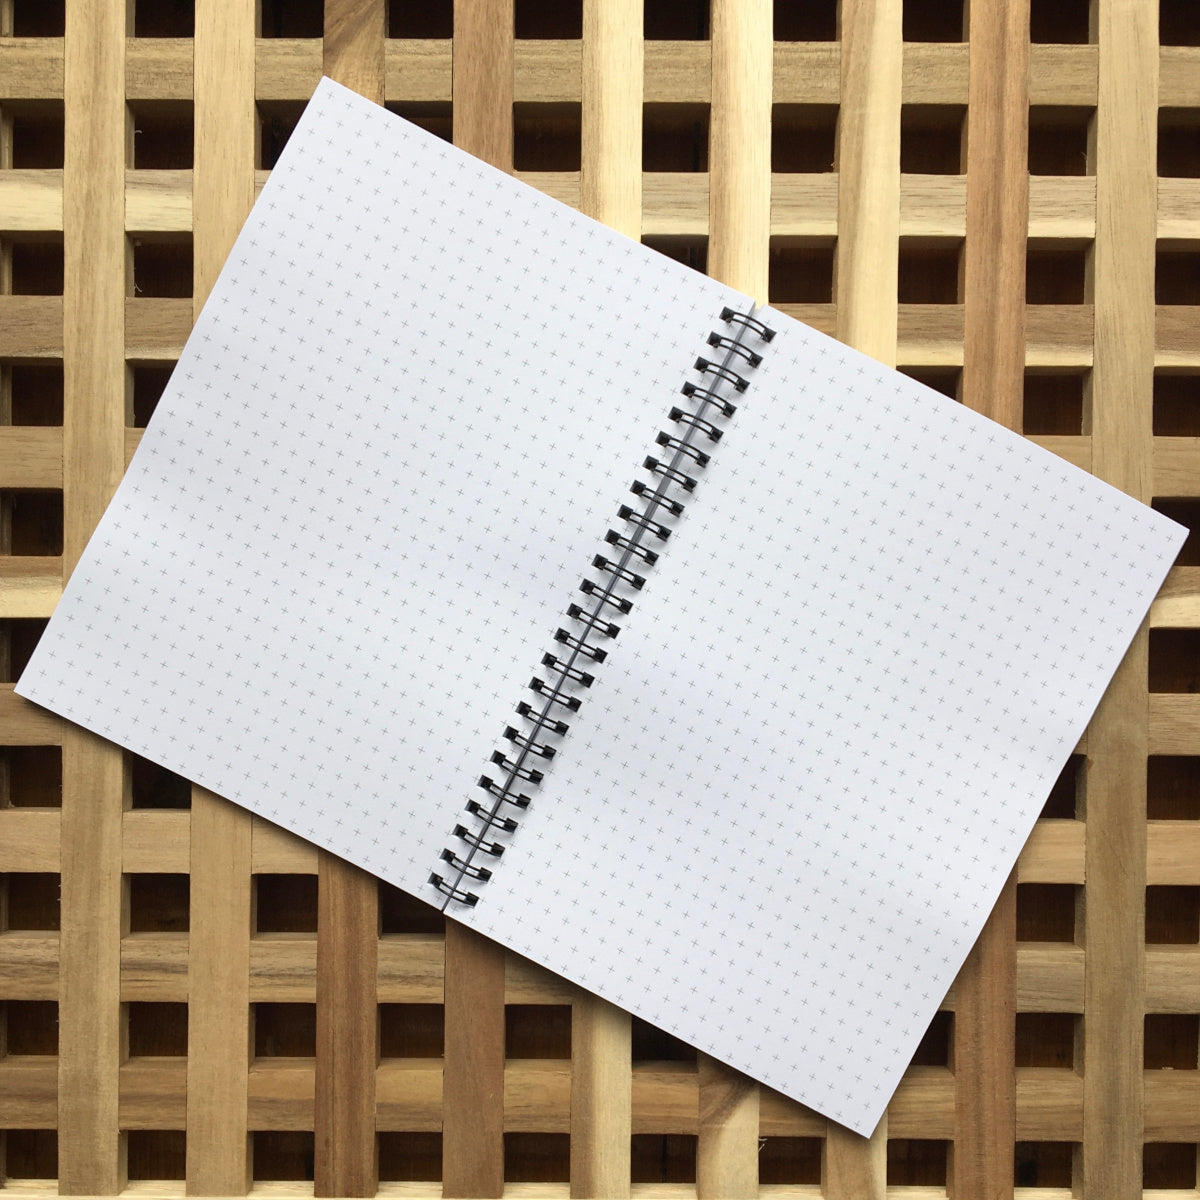 Spiral bound notebook lying open and flat showing pages of grid graph paper like little crosses all over the white paper